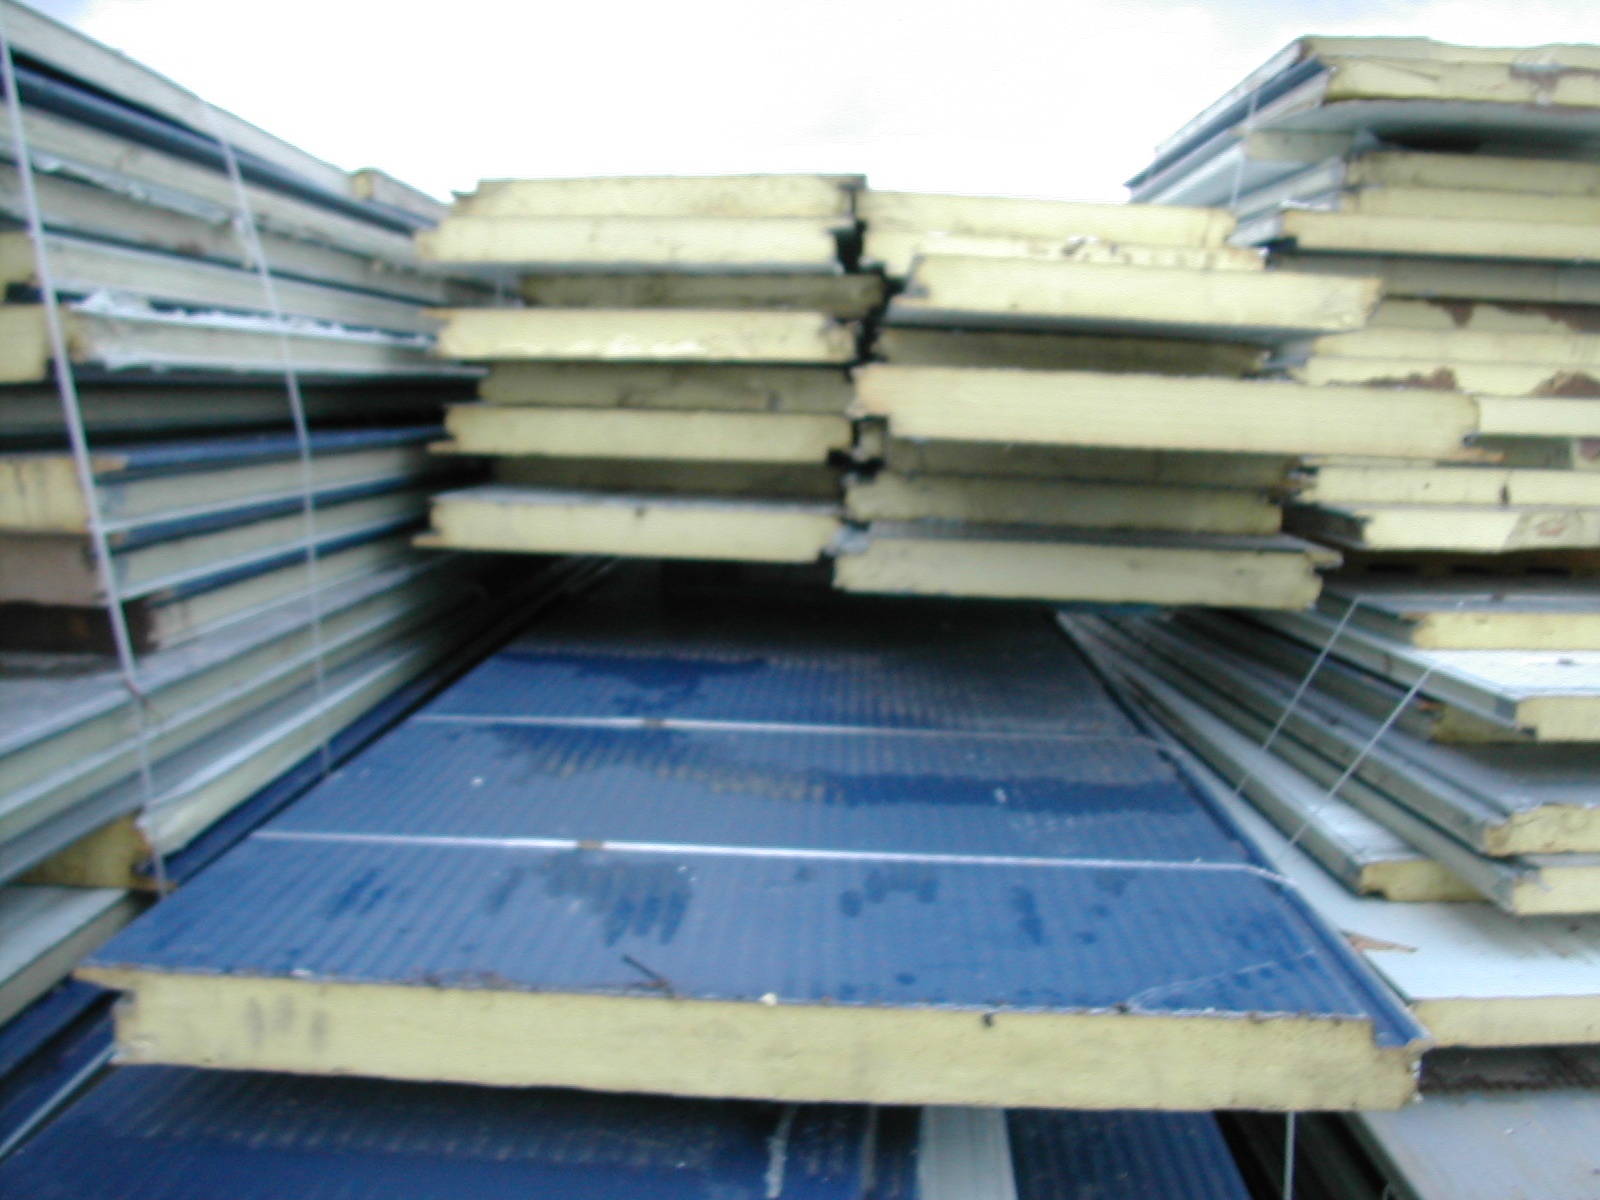 Insulation metal roof sheets Ben's Tiles and Reclamation Ltd